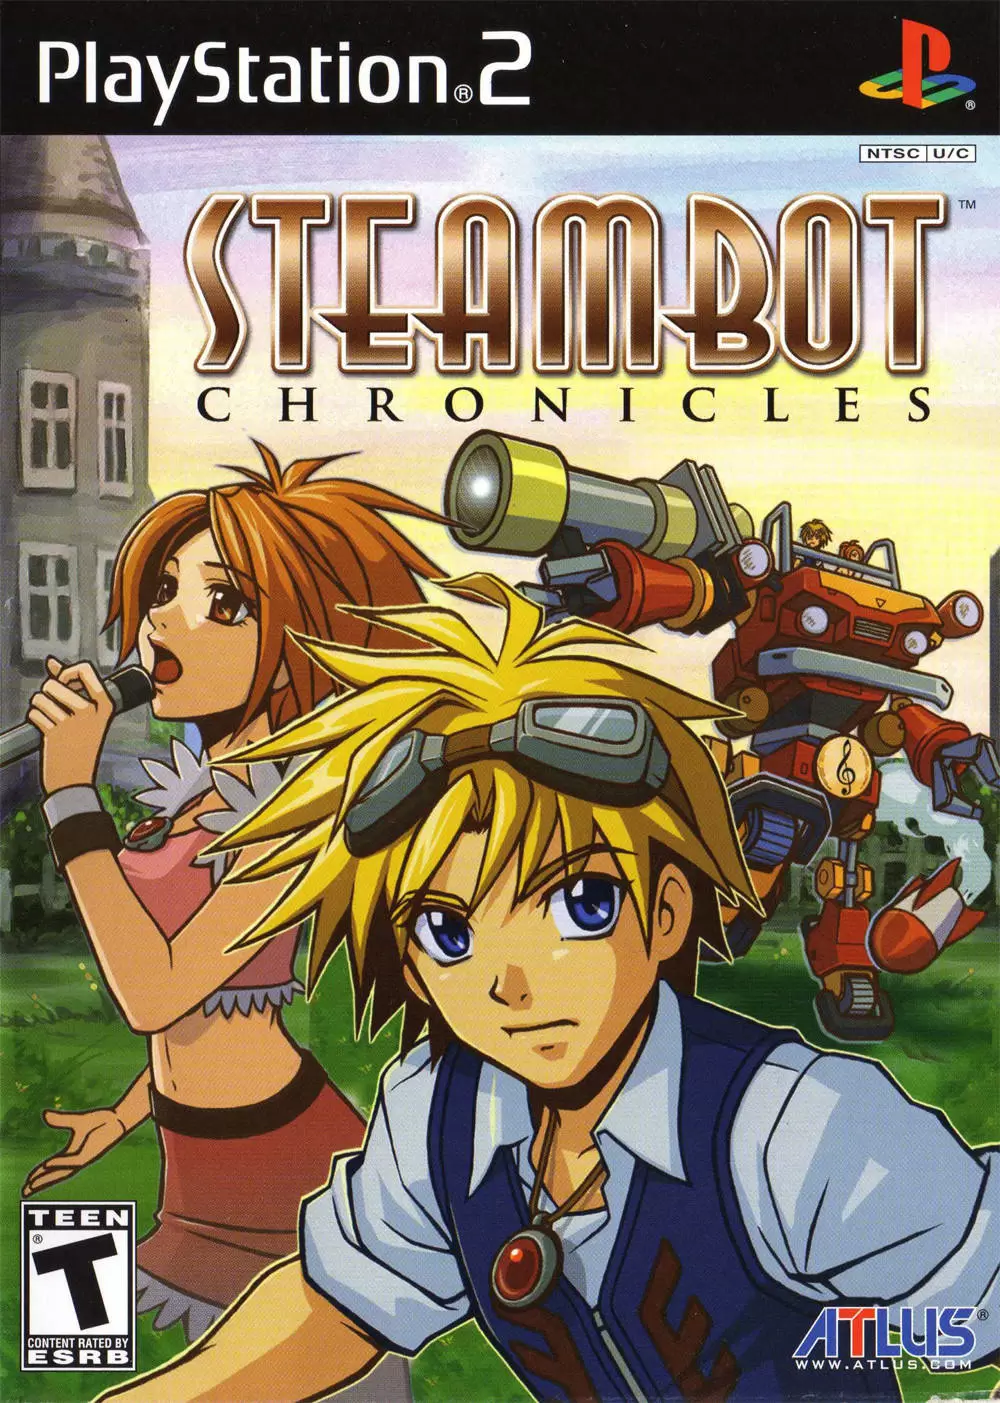 PS2 Games - Steambot Chronicles